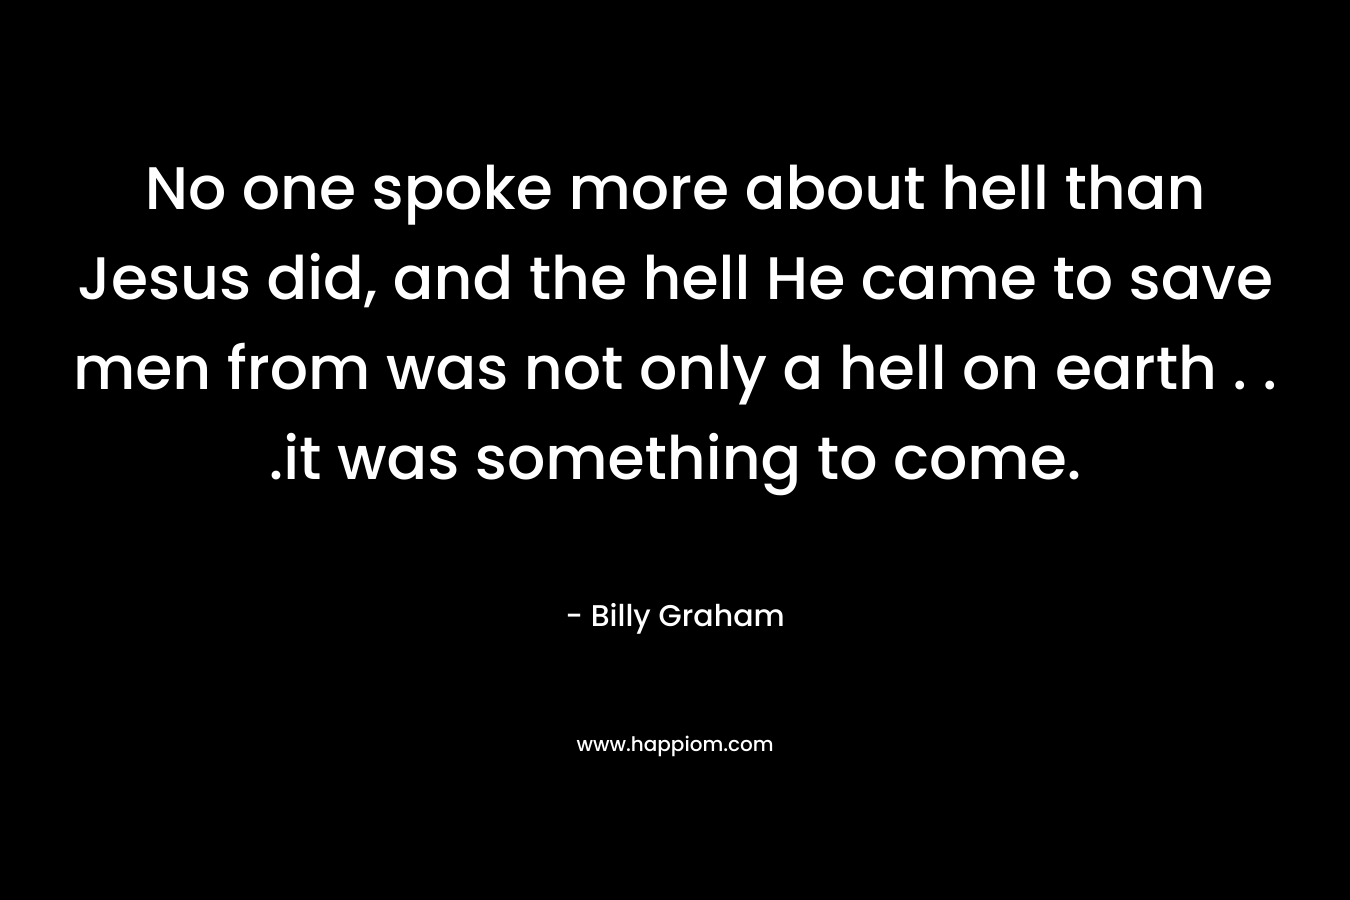 No one spoke more about hell than Jesus did, and the hell He came to save men from was not only a hell on earth . . .it was something to come.